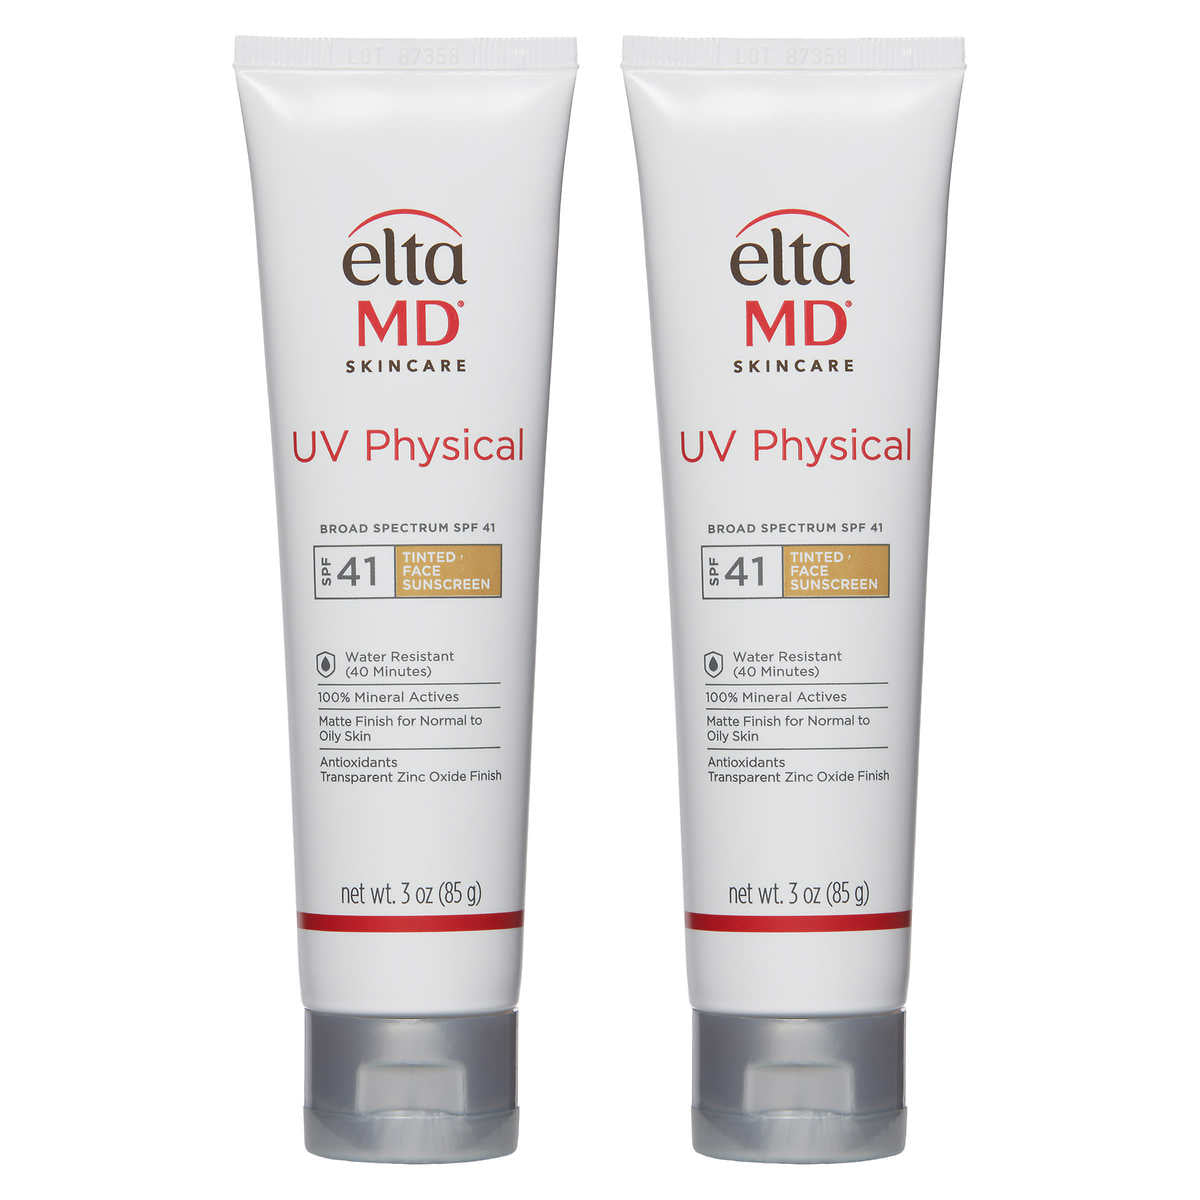 EltaMD UV Physical Broad-Spectrum SPF 41 Tinted Face Sunscreen 3 oz, 2-pack